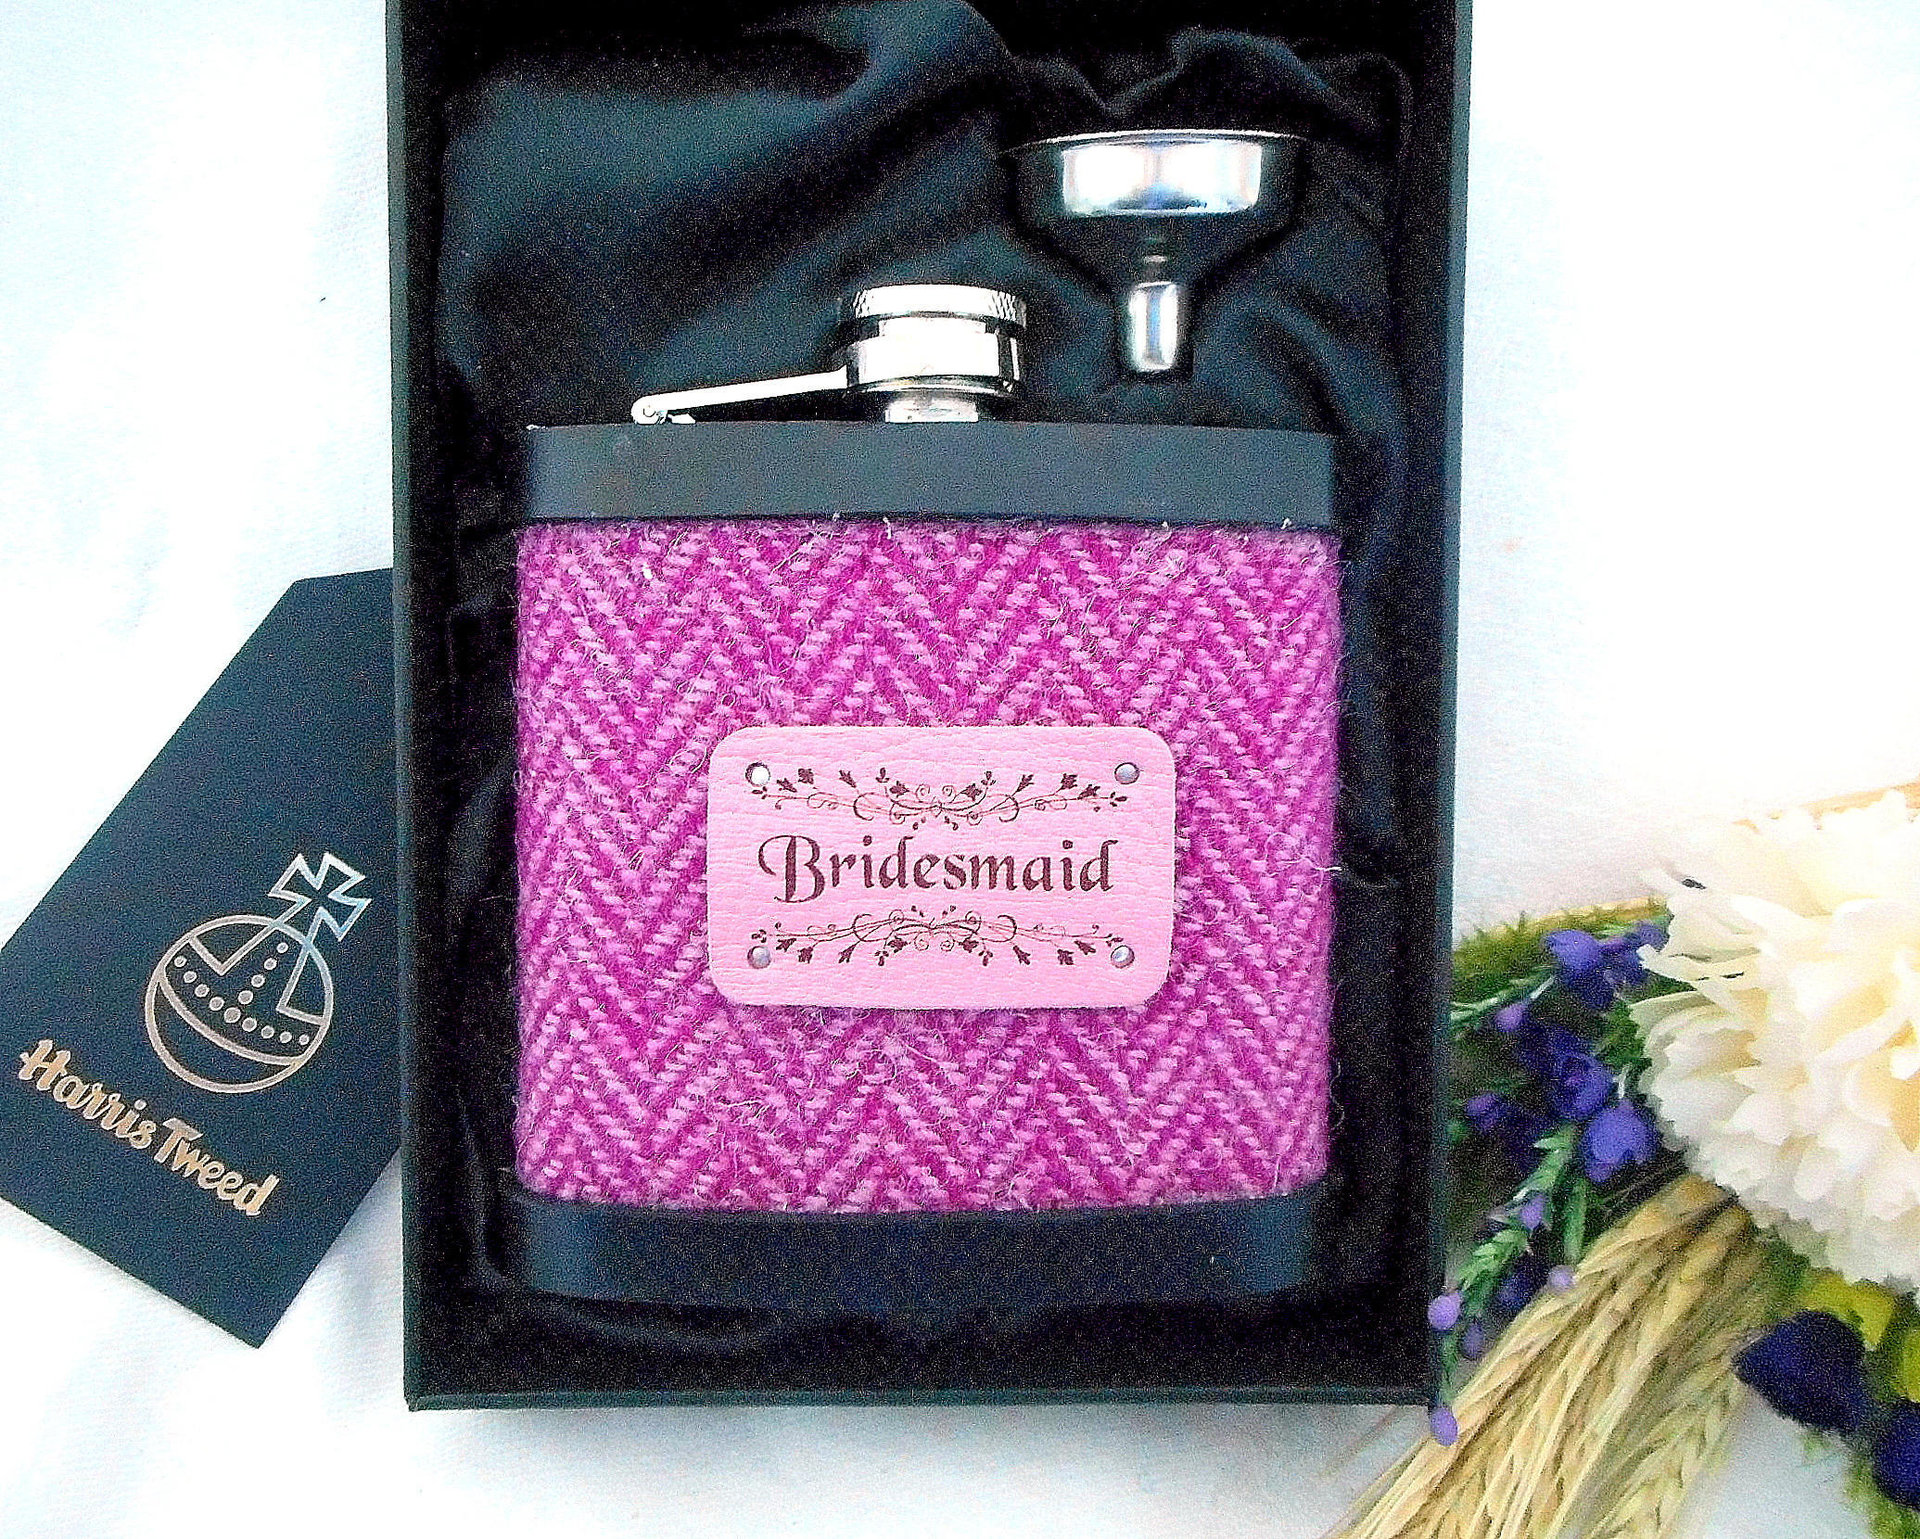 Bridesmaid gifts Harris Tweed hip flasks,  Set of 3, 4, 5 or 6 , all with leather label,  high quality luxury gift or wedding favour for bridal party, optional personalized box